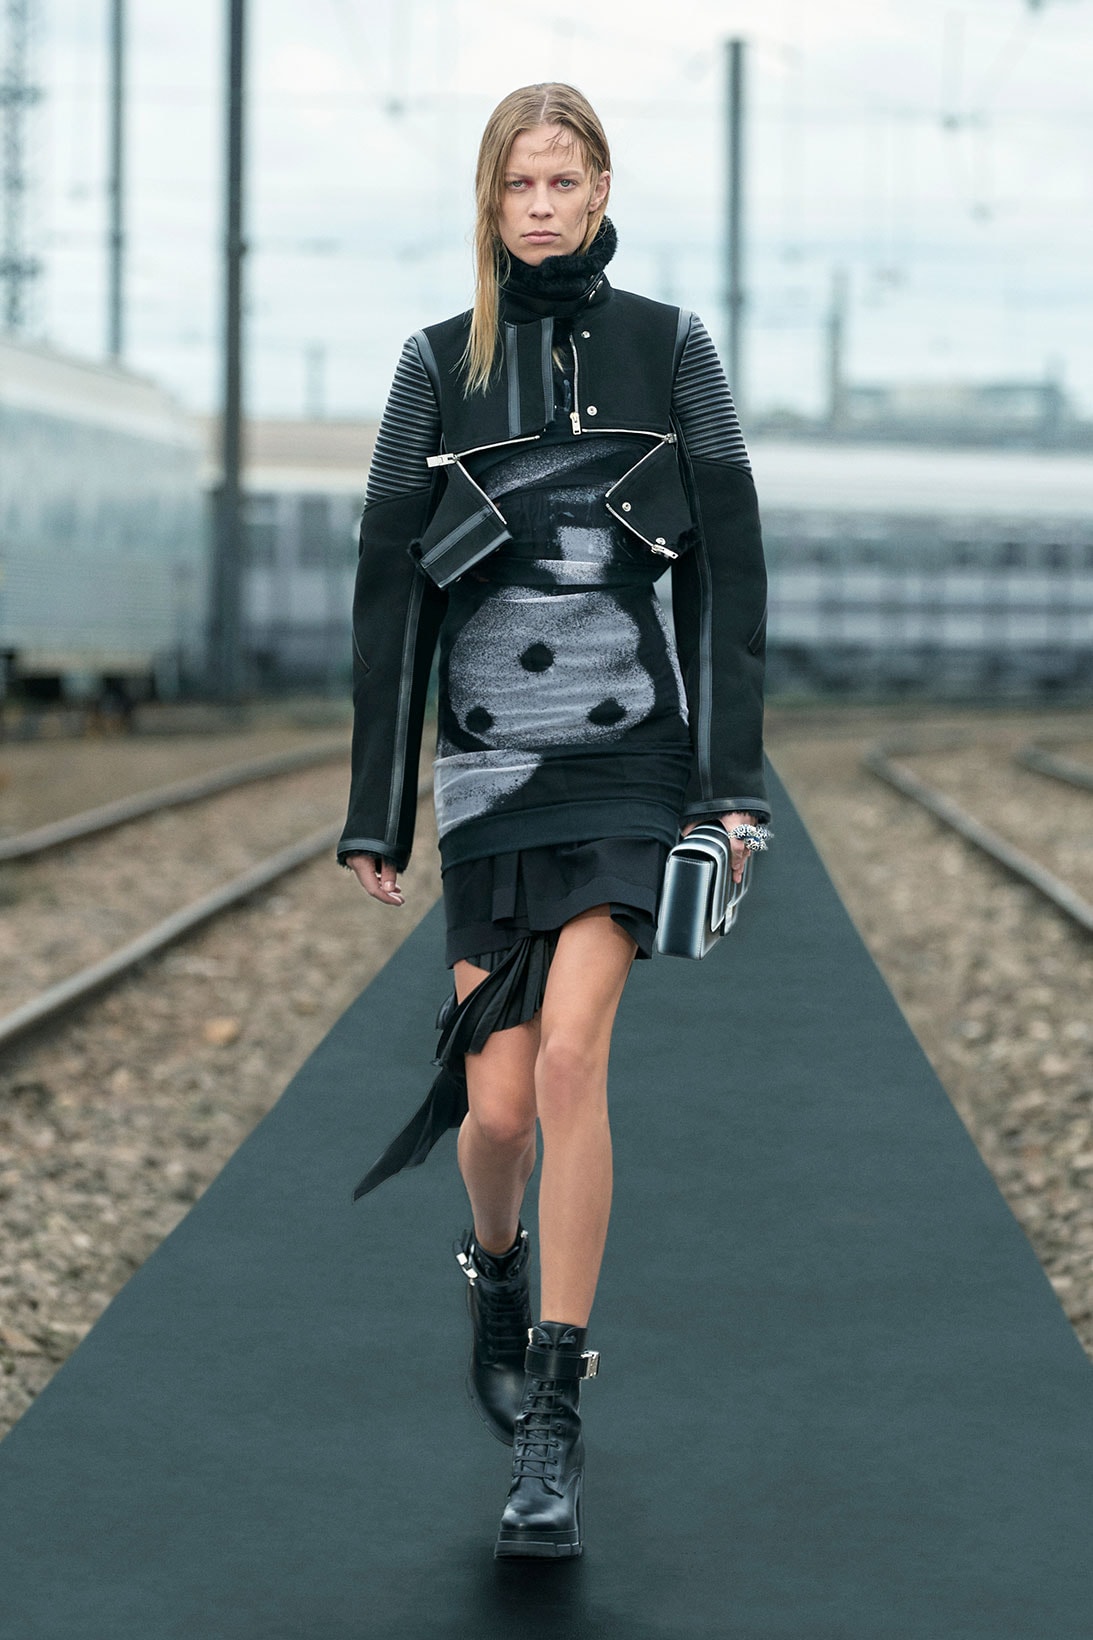 givenchy spring 2022 precollection resort matthew m williams jacket dress